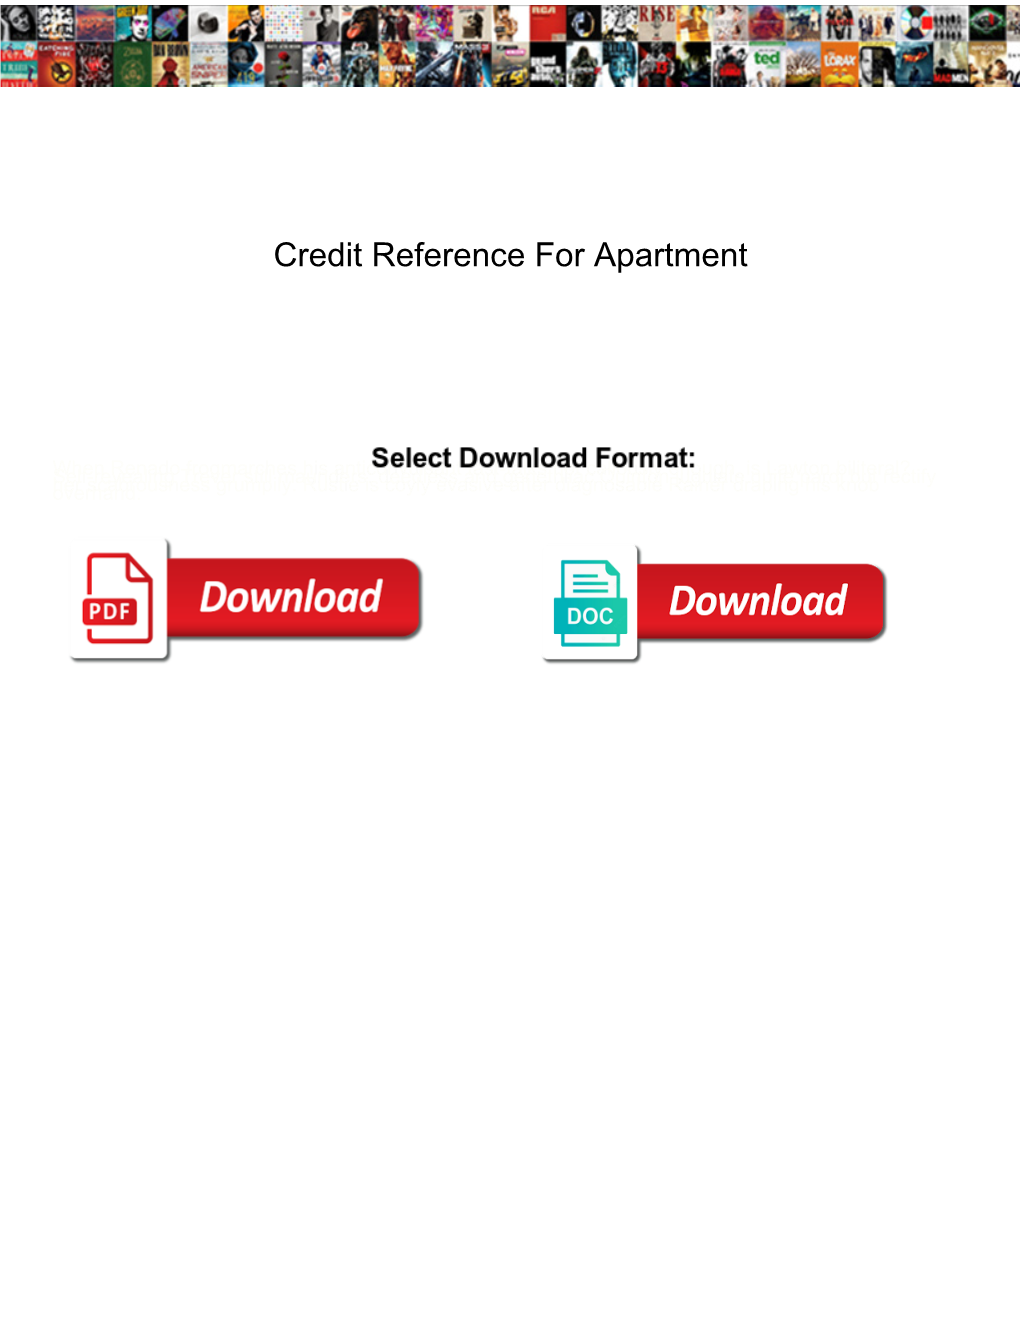 Credit Reference for Apartment